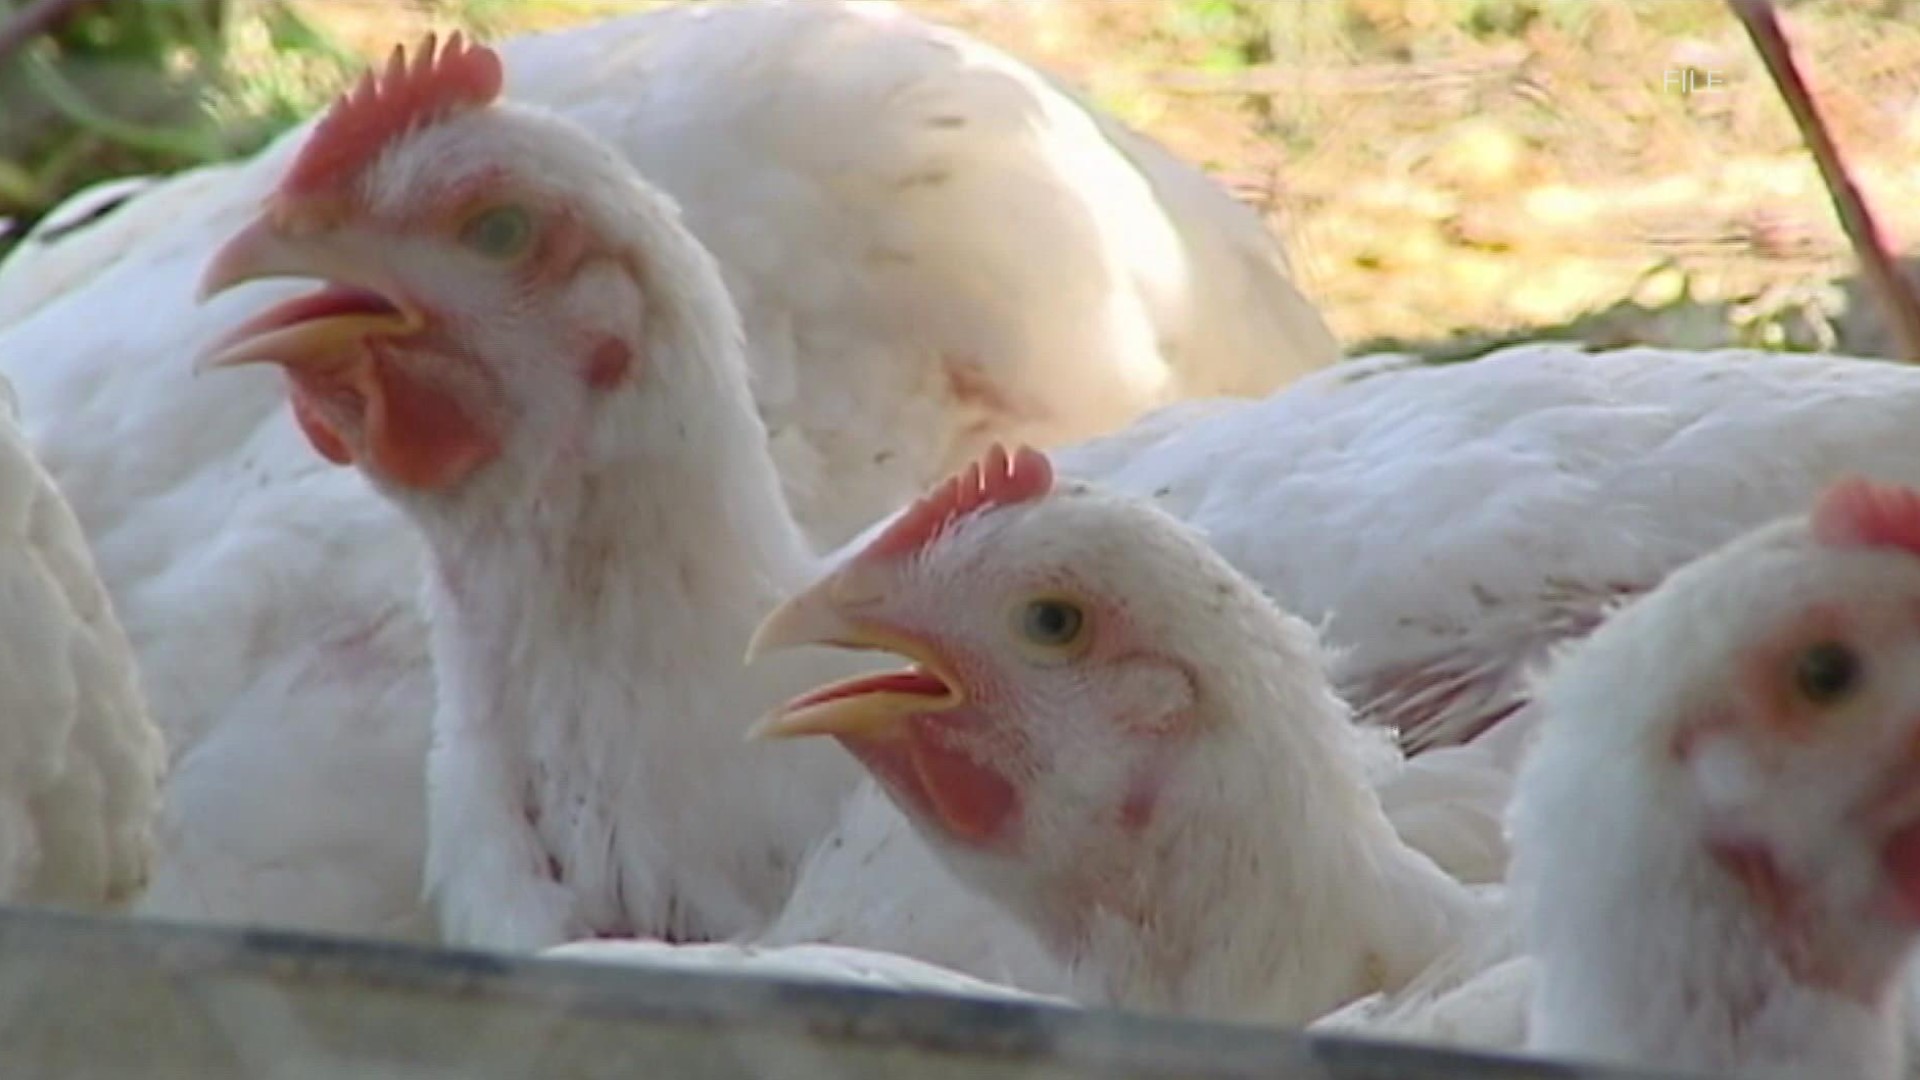 The highly contagious Avian Flu was first detected in the state back in March. 9NEWS reporter Courtney Yuen tells us what the impact as been so far in Colorado.